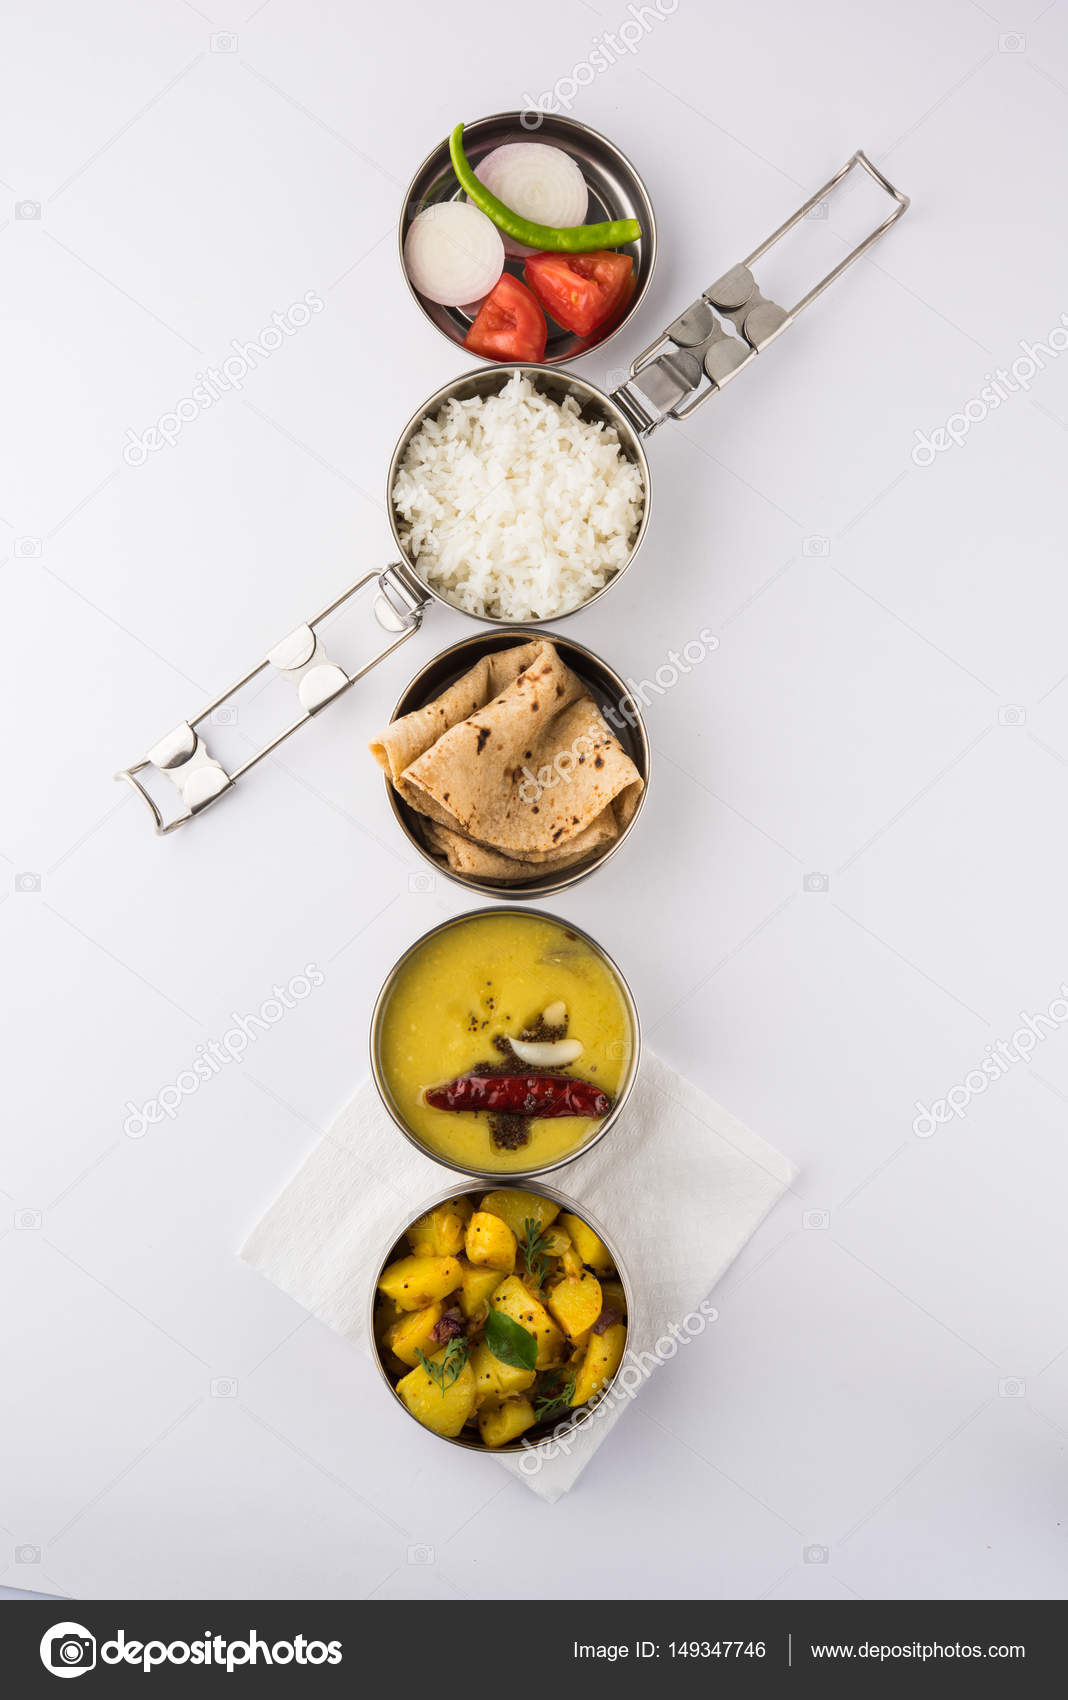 https://st3.depositphotos.com/5653638/14934/i/1600/depositphotos_149347746-stock-photo-indian-typical-stainless-steel-lunch.jpg